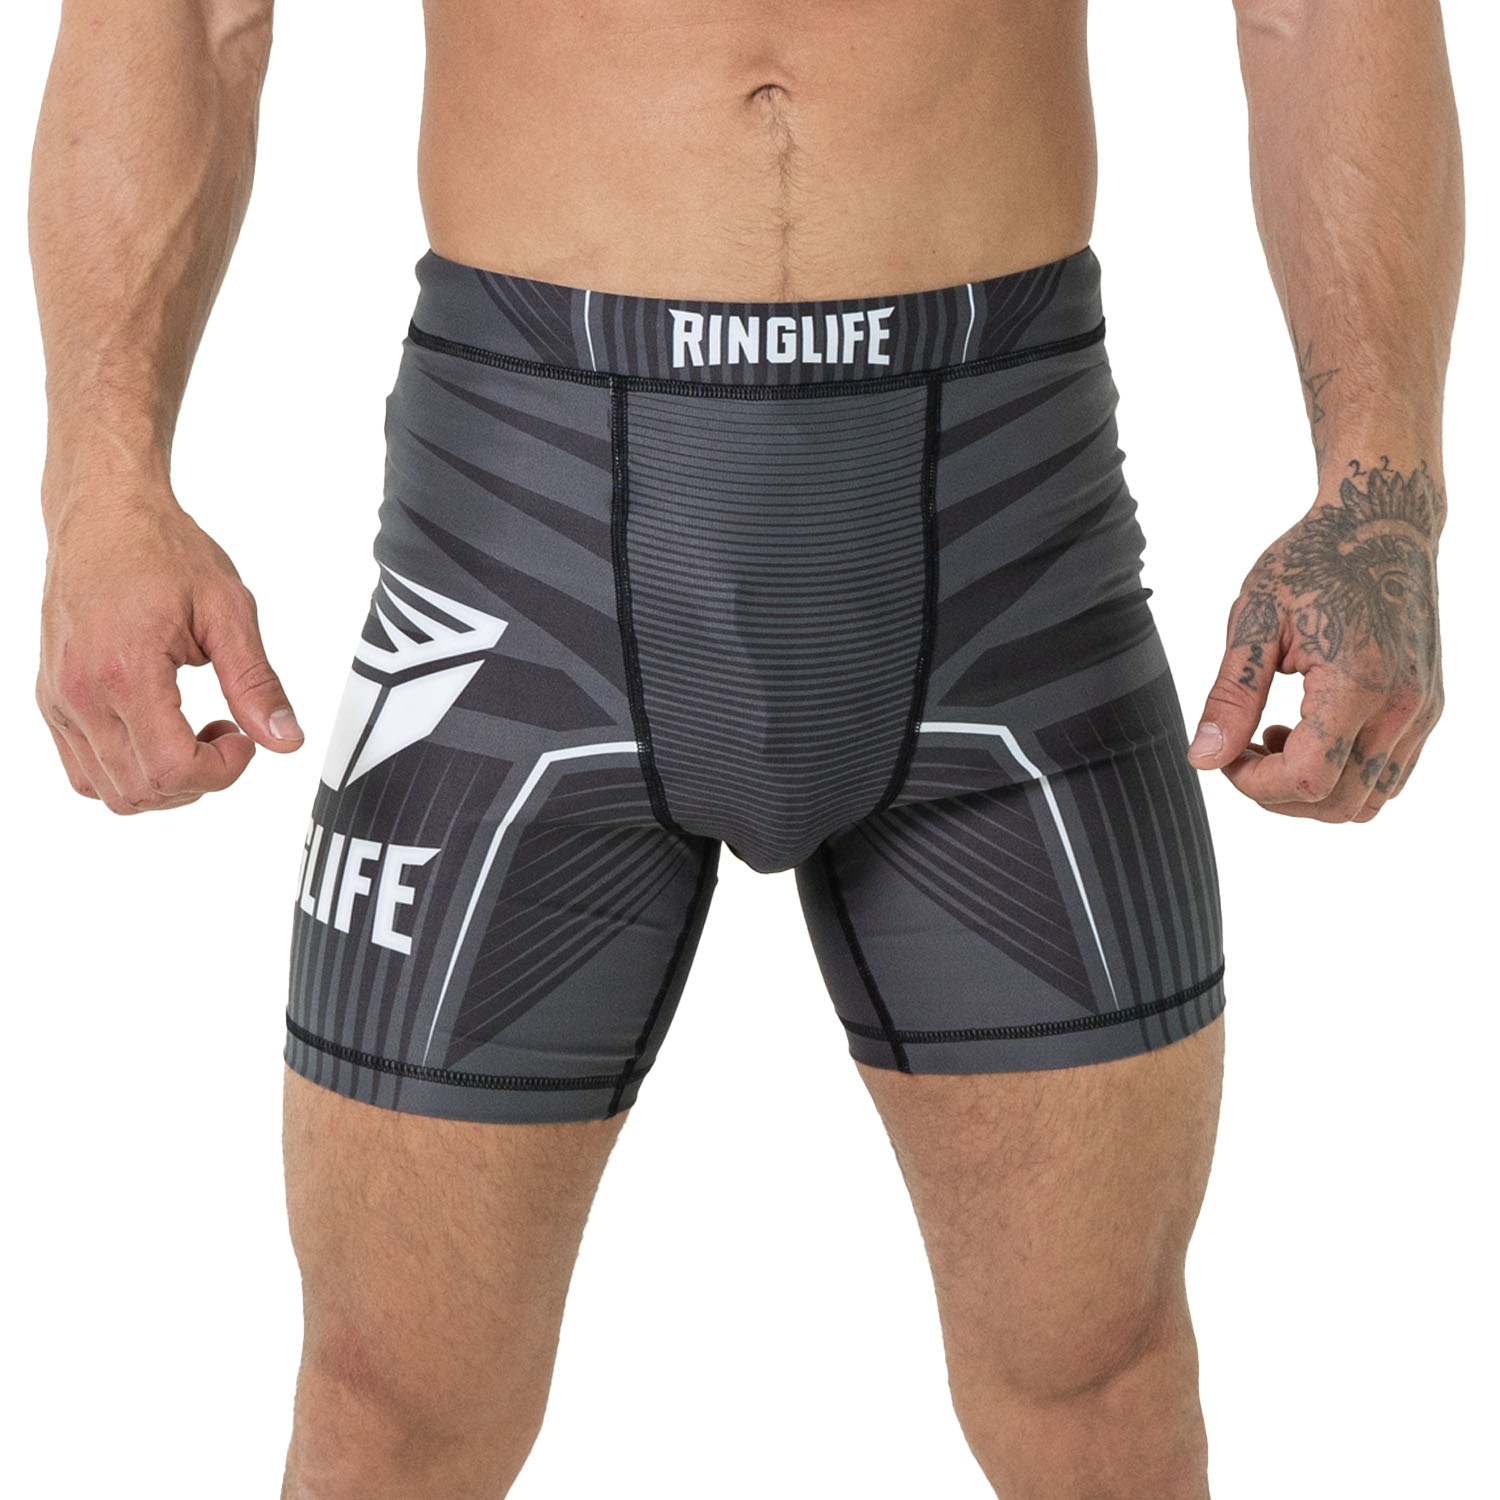 RINGLIFE Compression Shorts - Octaring schwarz-weiss